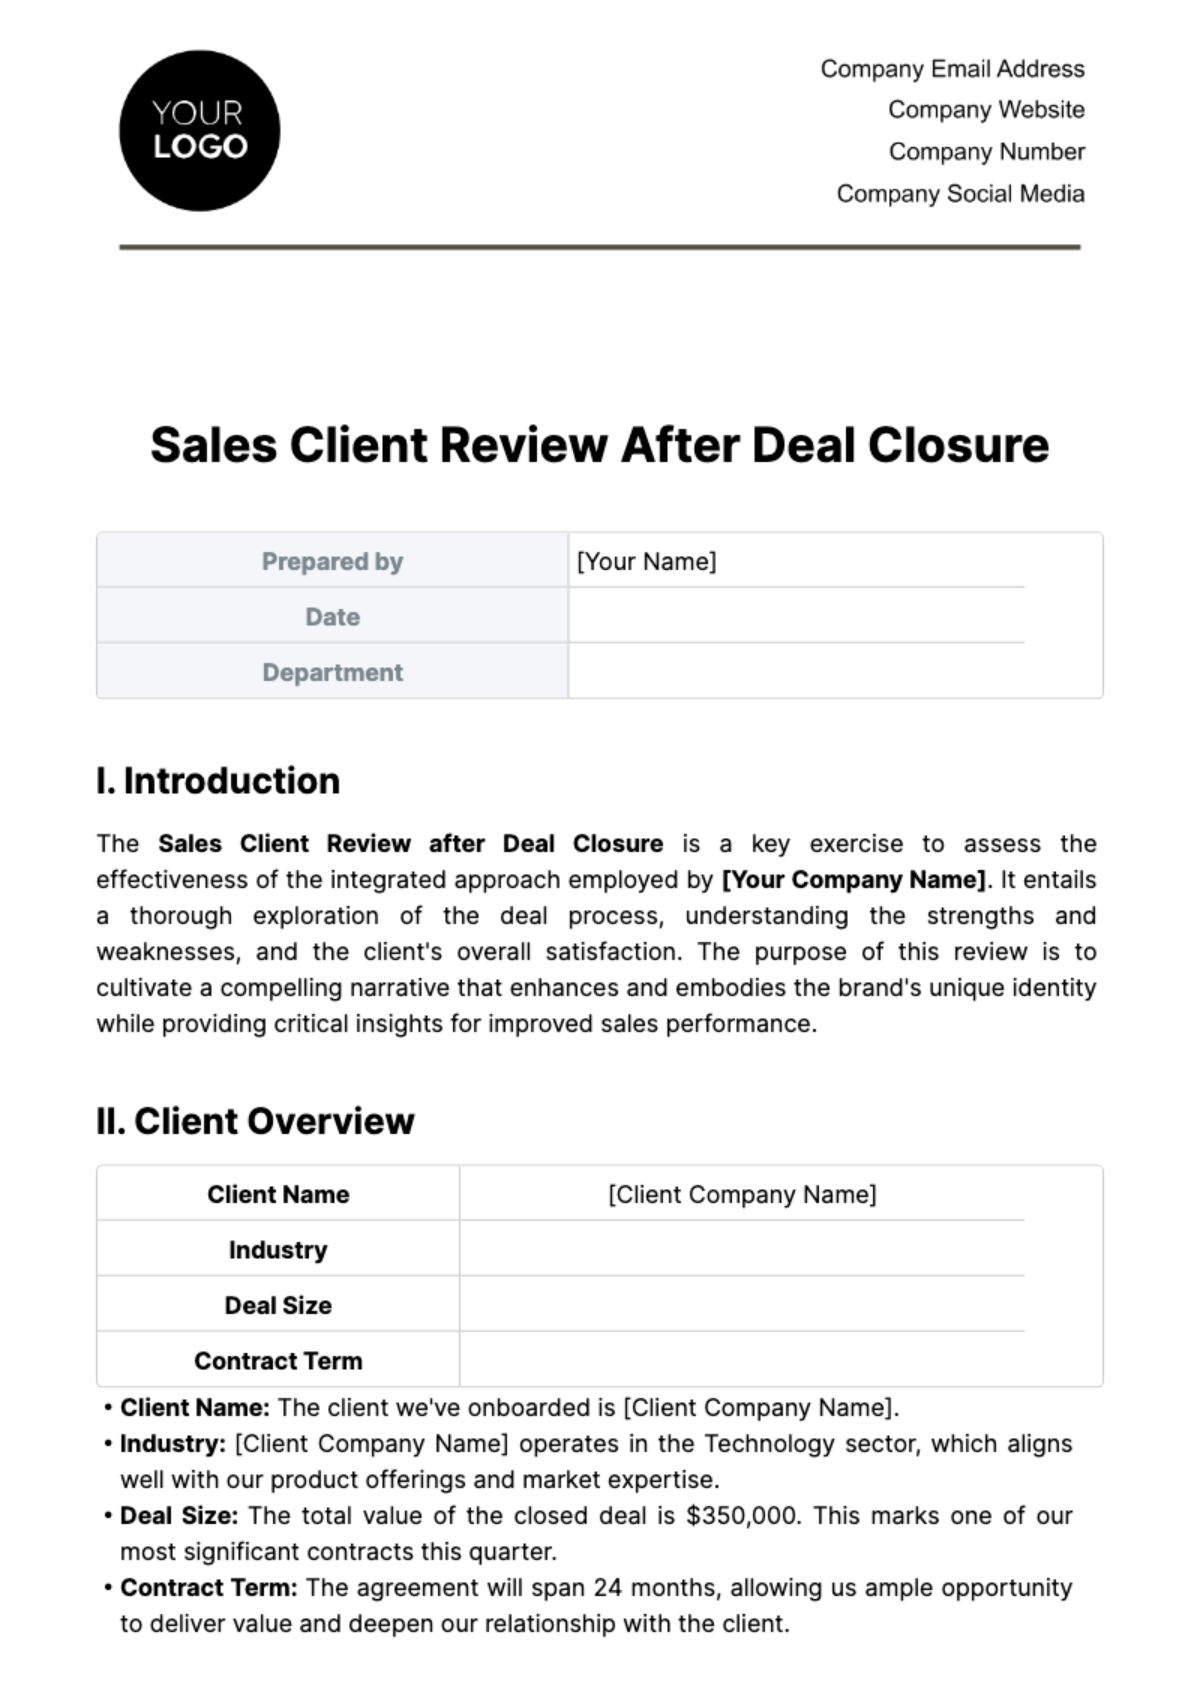 Sales Client Review after Deal Closure Template